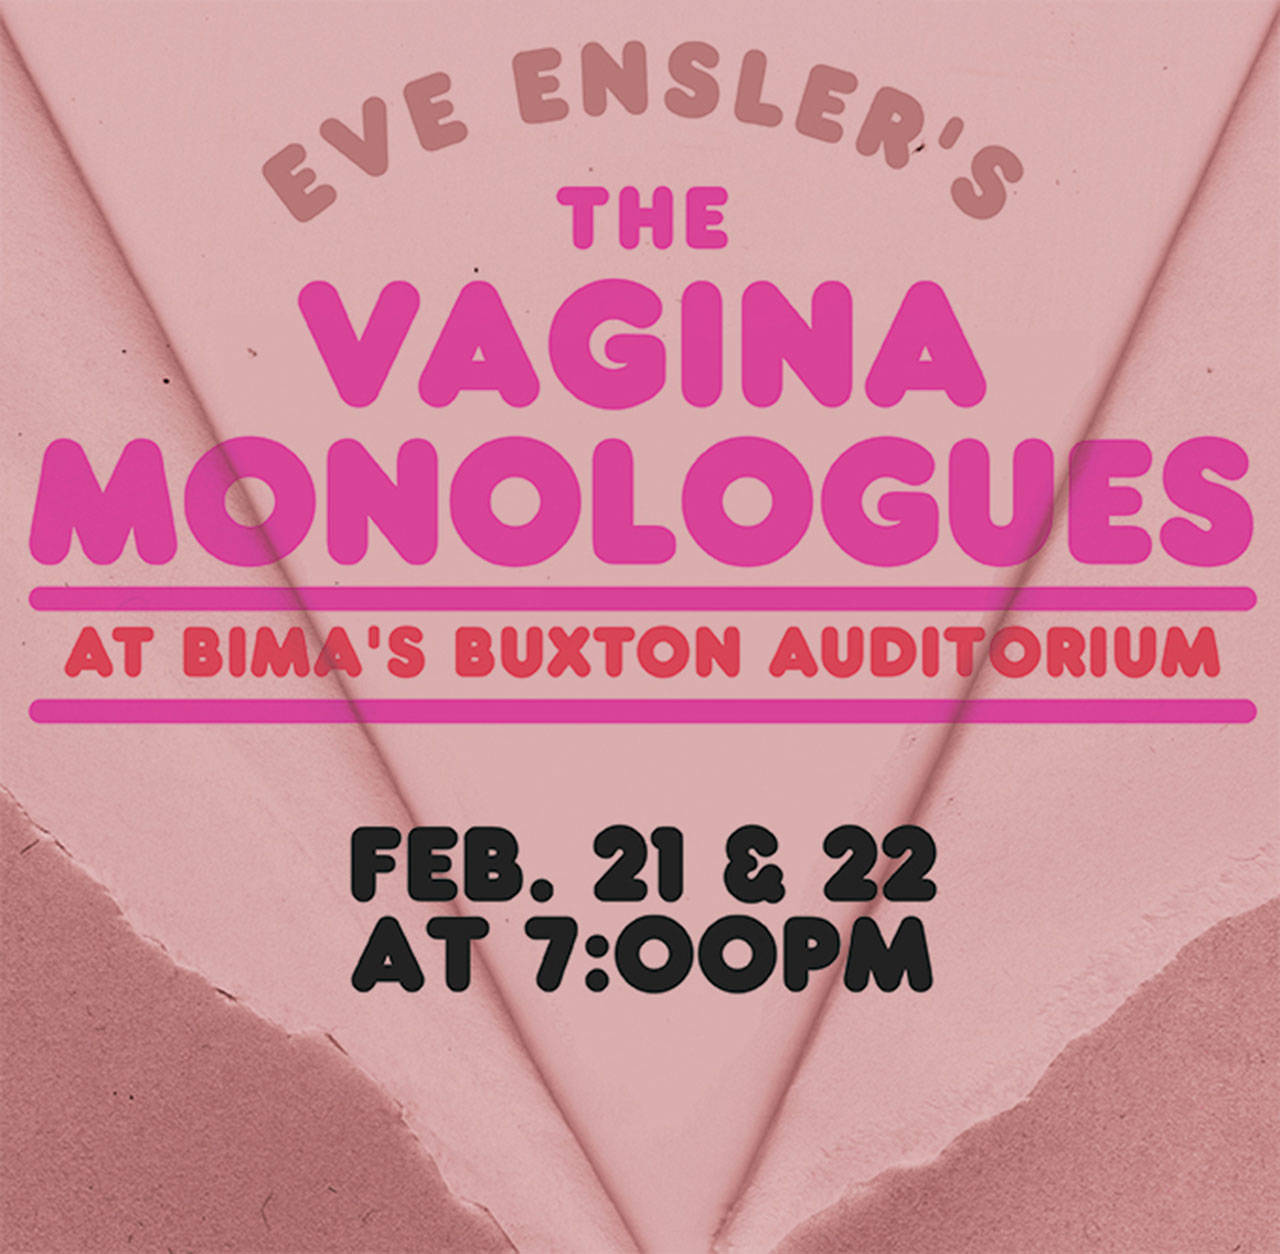 Image courtesy of the Bainbridge Island Museum of Art | The Bainbridge Island Museum of Art will present a production of “The Vagina Monologues” at 7 p.m. Friday, Feb. 21 and Saturday, Feb. 22 in the Frank Buxton Auditorium as part of V-Day.